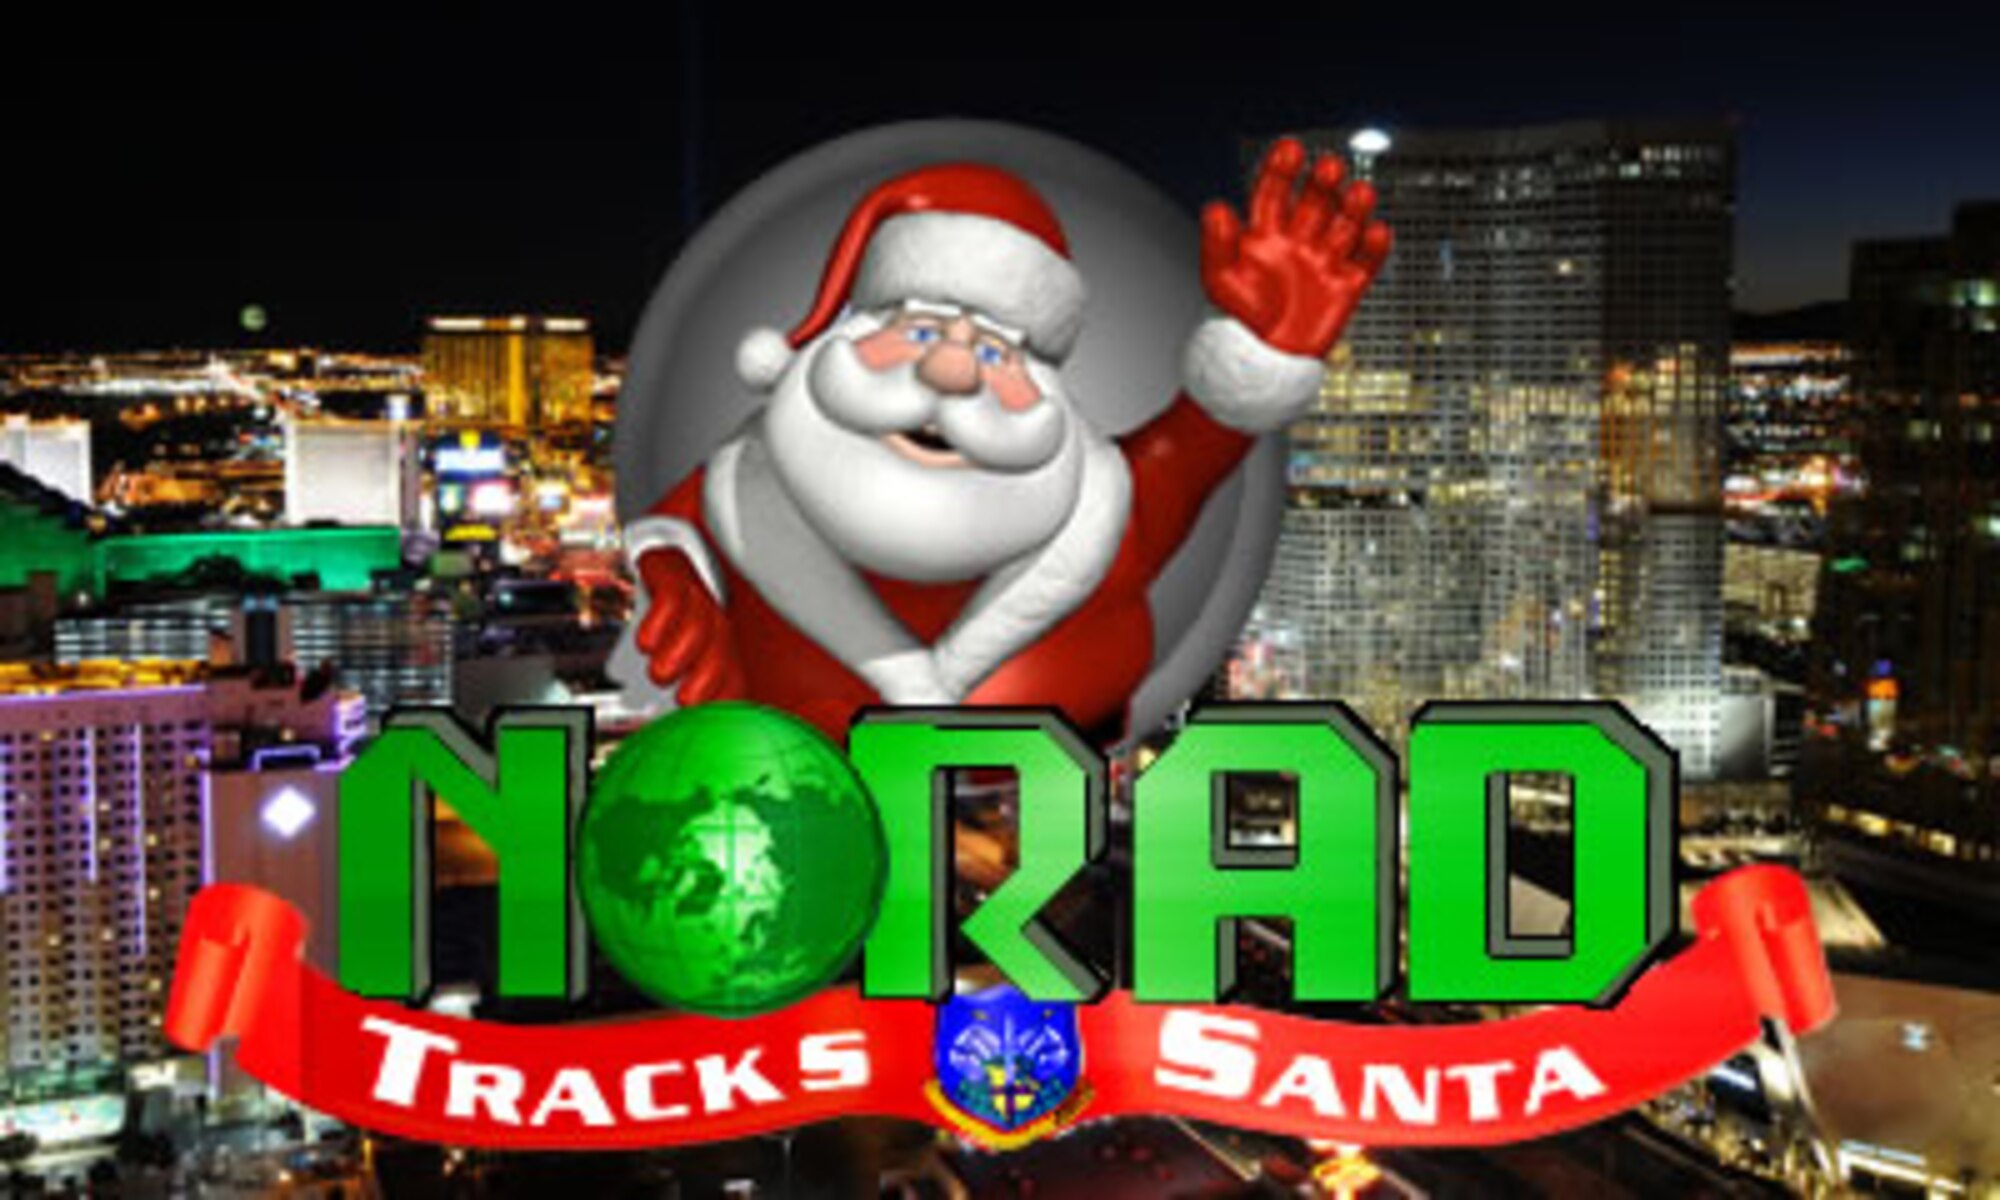 Through satellite systems, high-powered radars and jet-interceptors, NORAD will track Santa Claus as he makes his Christmas Eve journey around the world. (U.S. Air Force graphic)